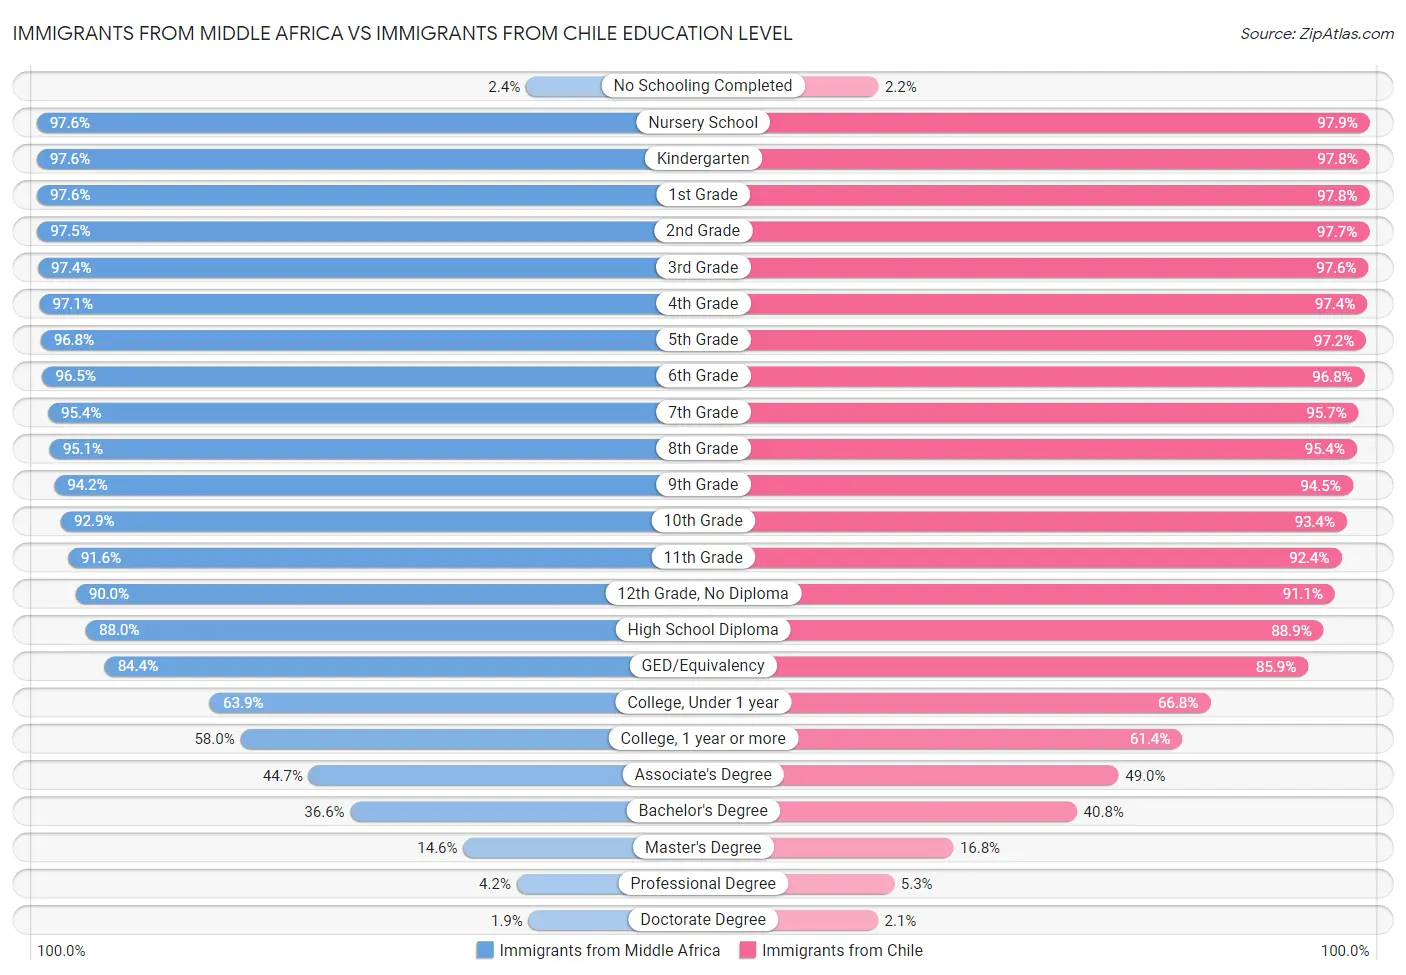 Immigrants from Middle Africa vs Immigrants from Chile Education Level